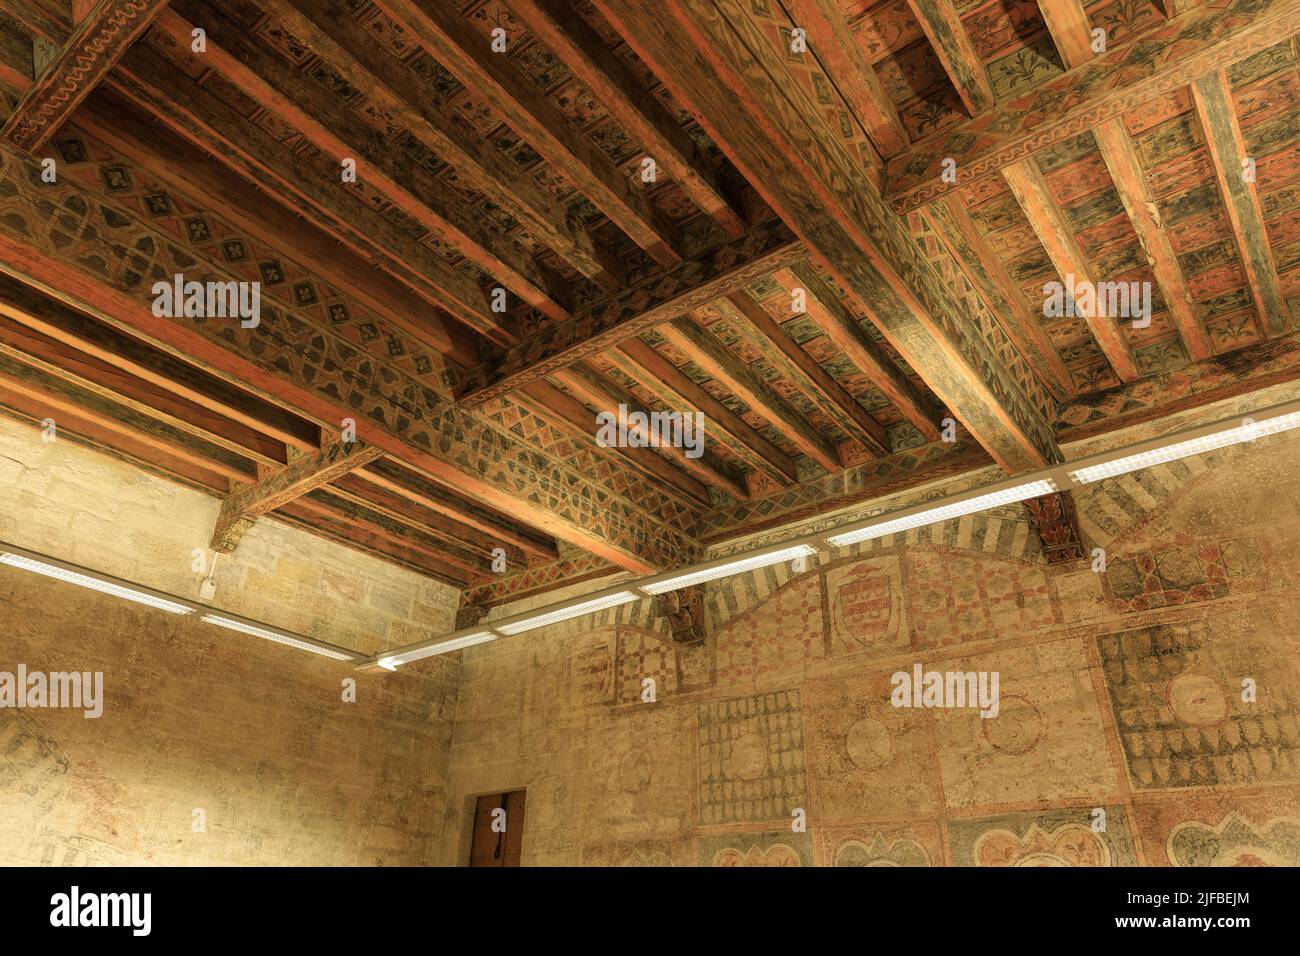 France, Vaucluse, Avignon, rue Laboureur, Livrée Ceccano, cardinalice palace (14th century), today municipal library, ceilings and wall decorations in the reading rooms Stock Photo